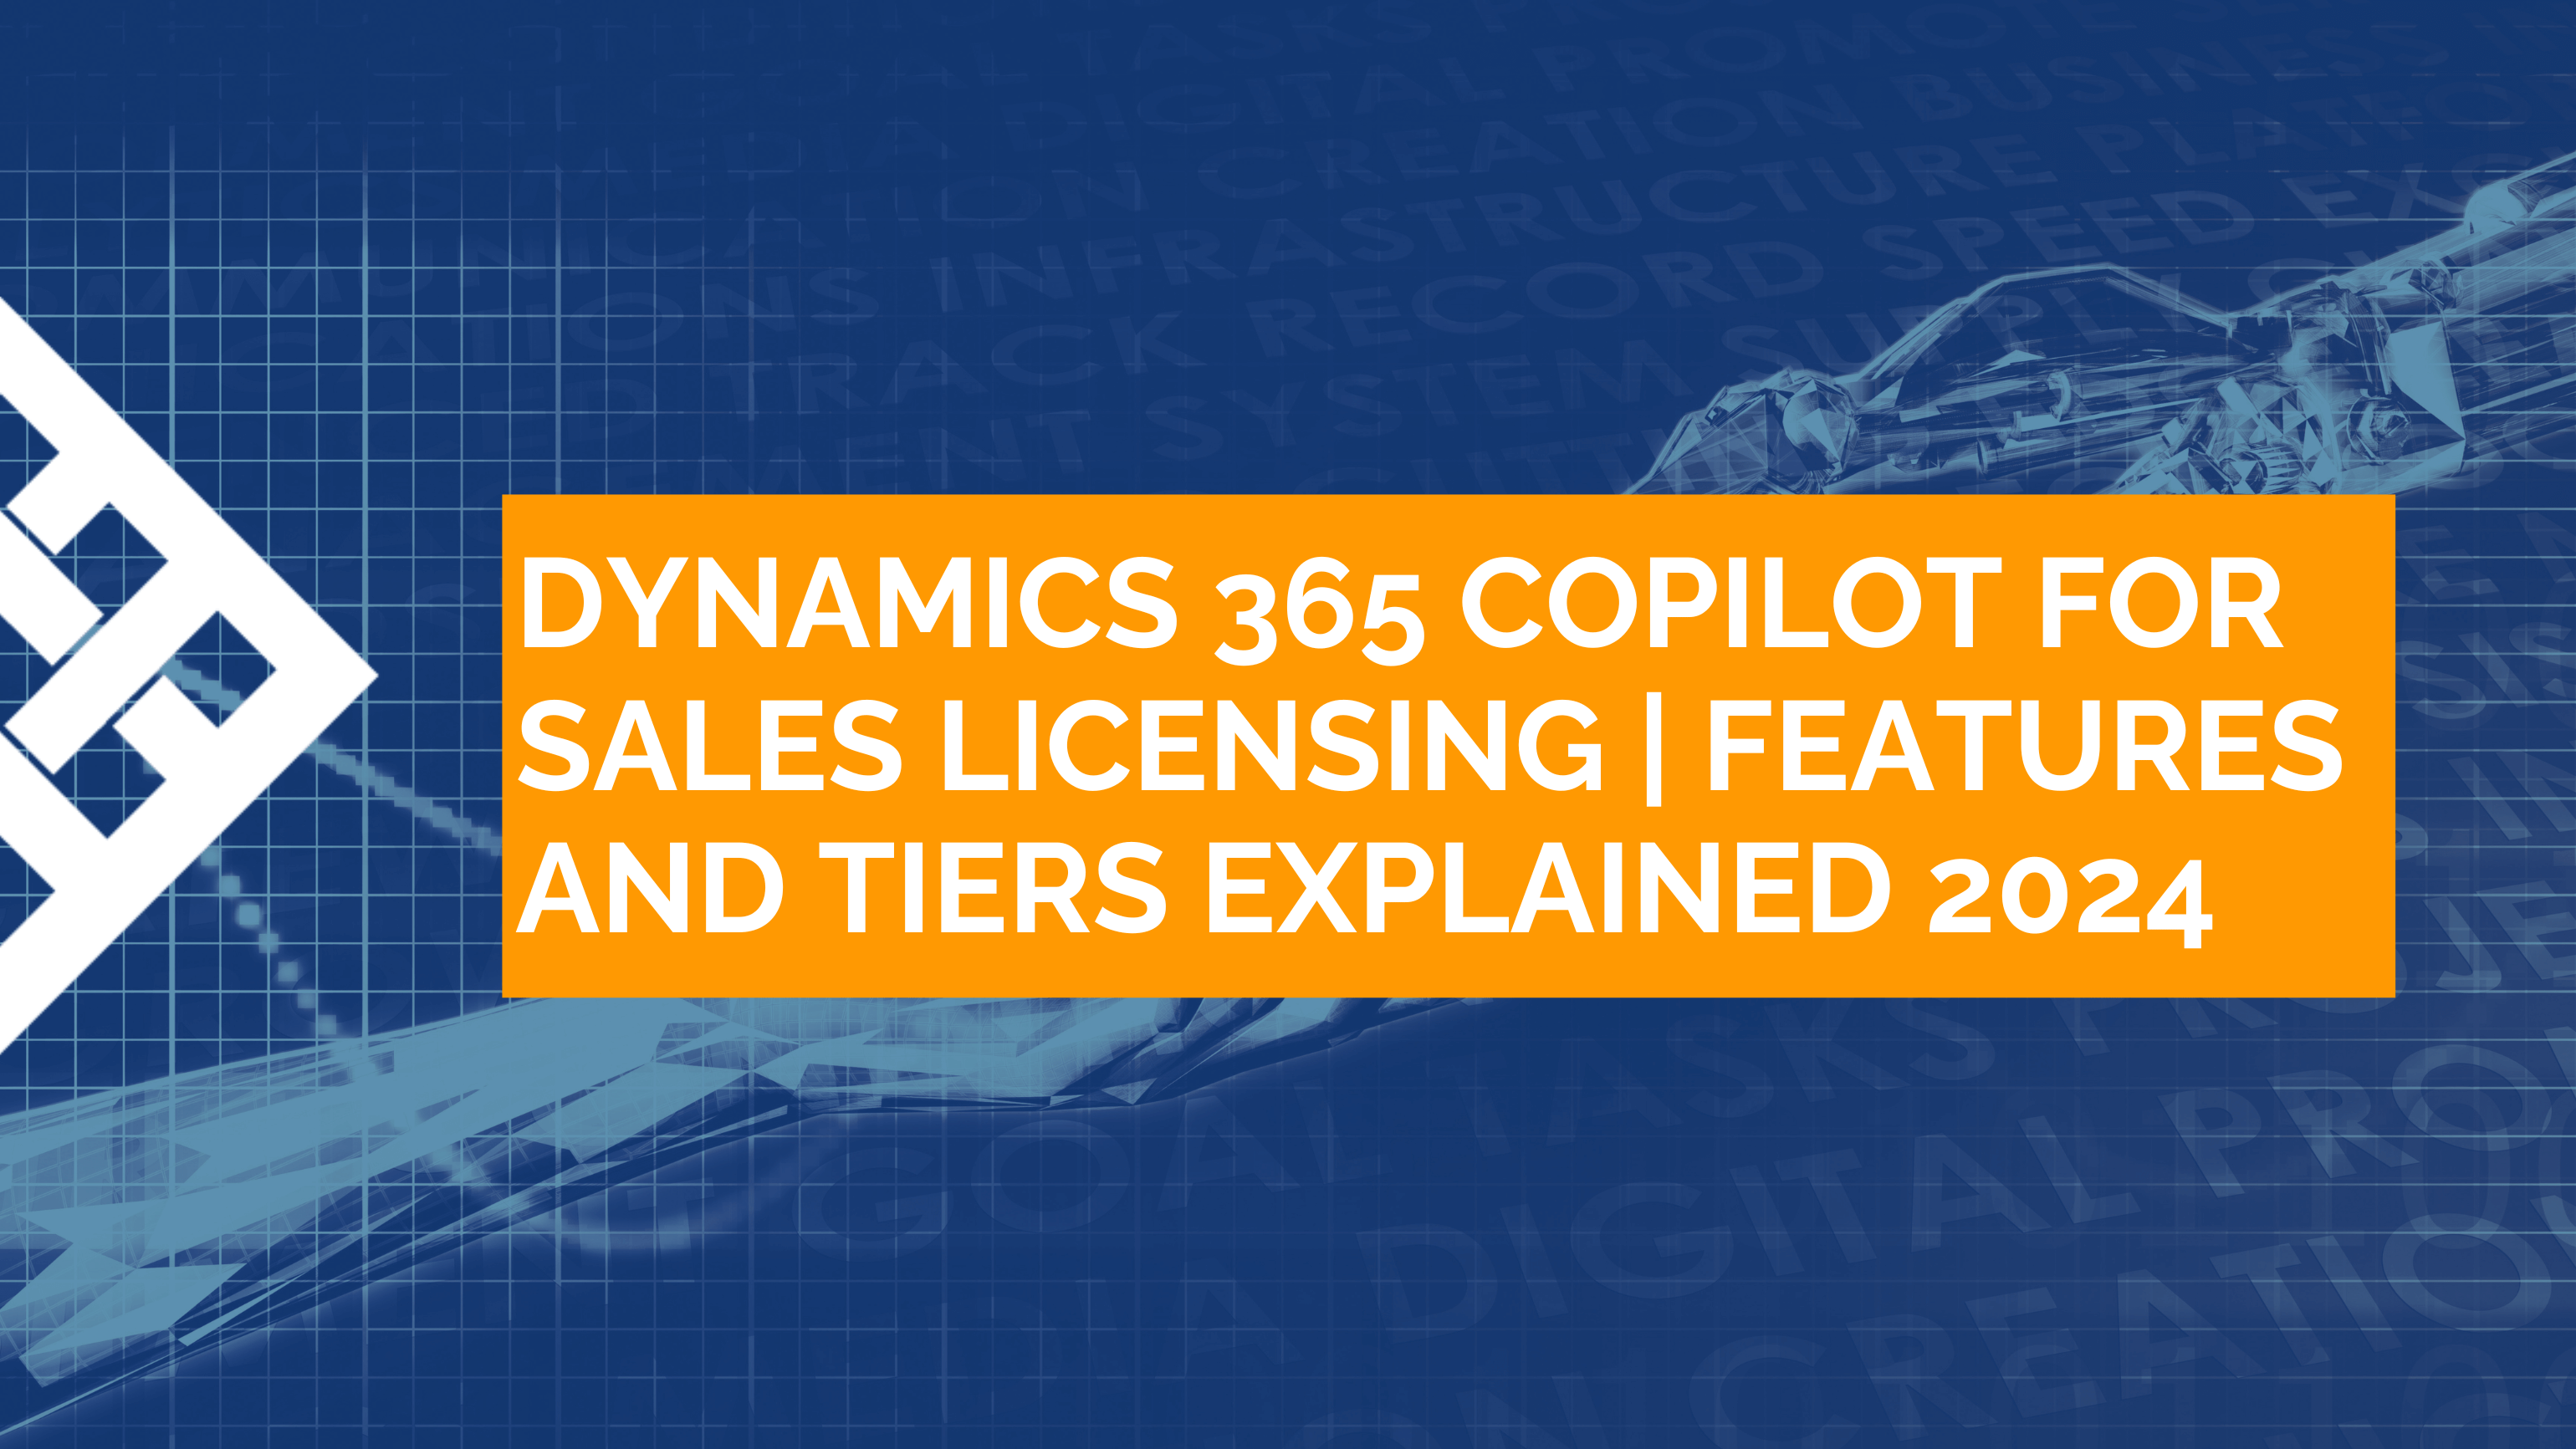 Dynamics 365 Copilot for Sales Licensing | Features and Tiers Explained 2024 header image